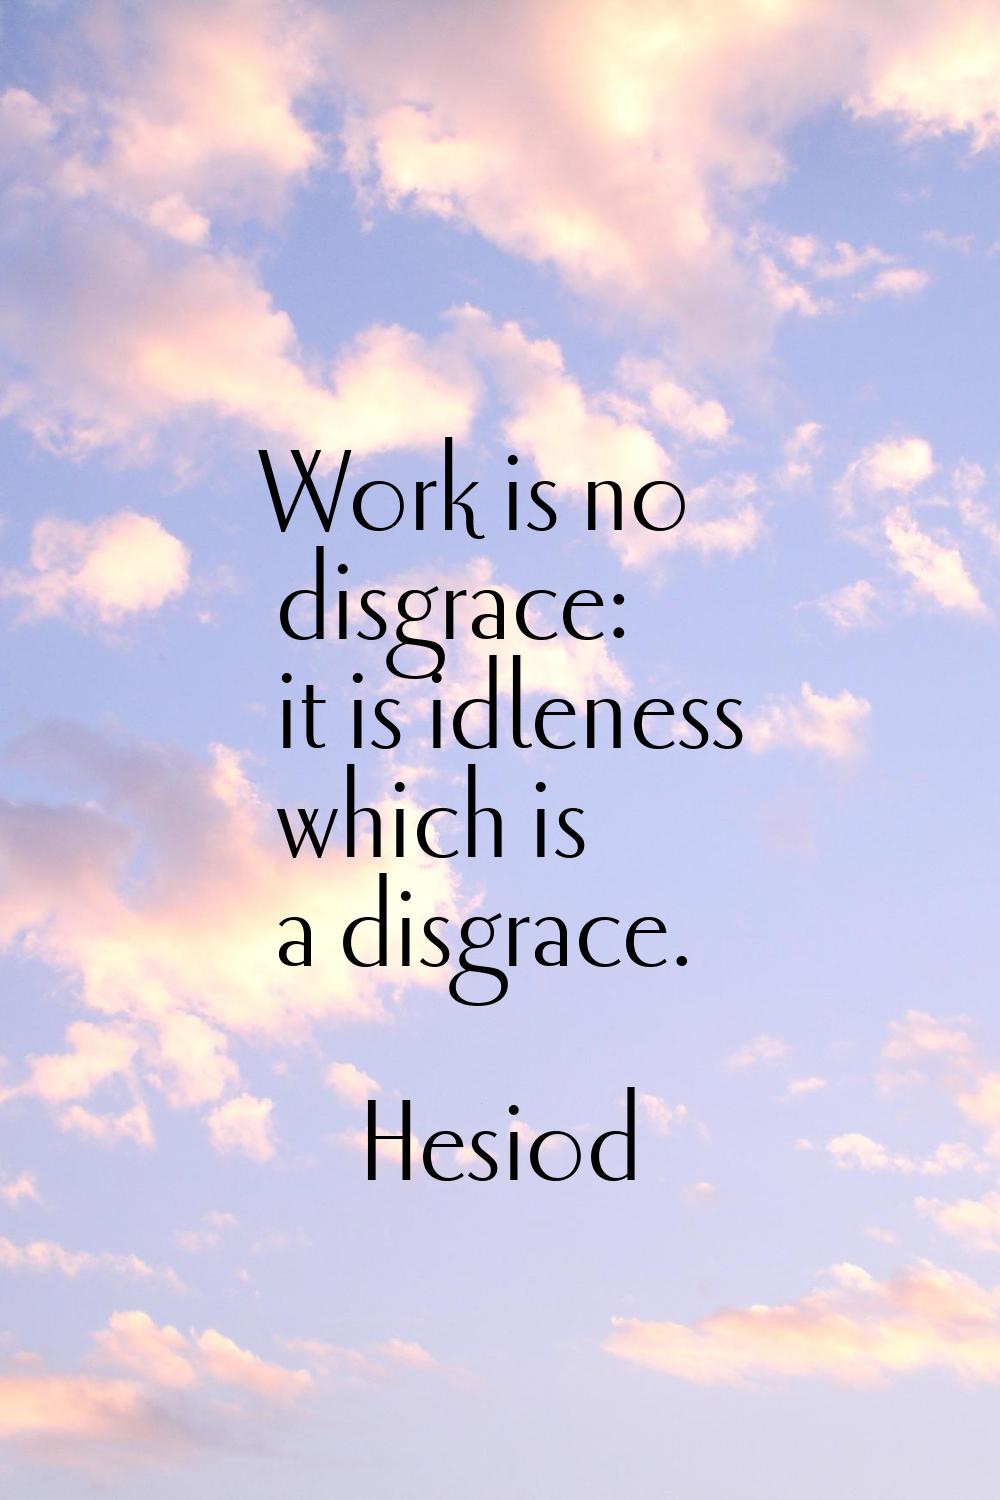 Work is no disgrace: it is idleness which is a disgrace.